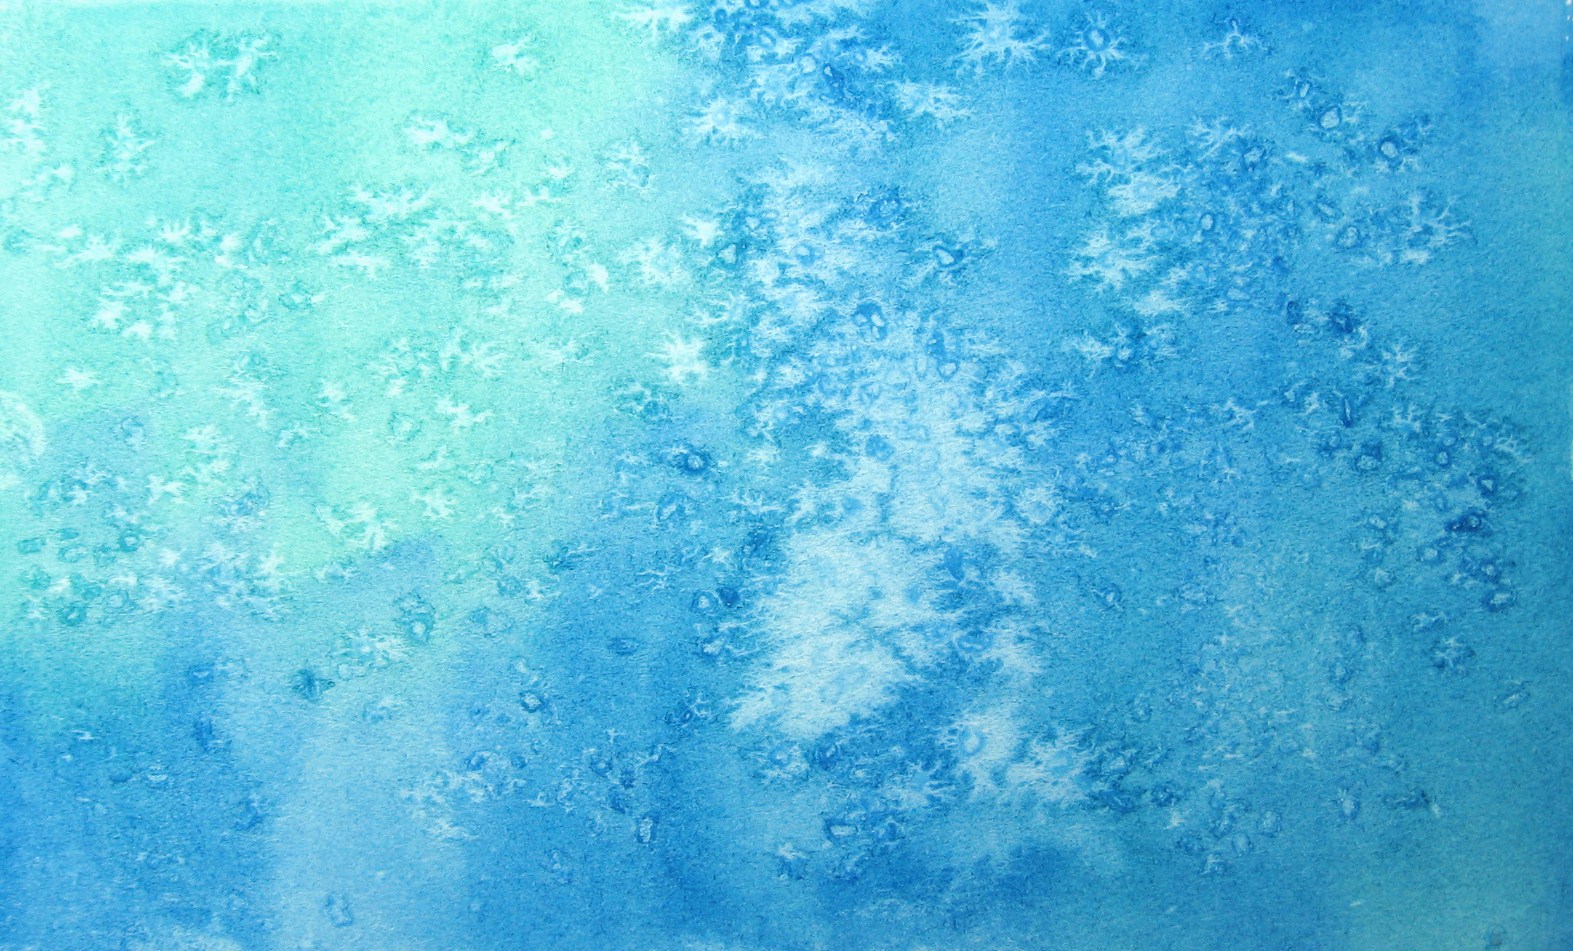 Green And Blue Watercolors Painted Onto The Surface While Paint Is